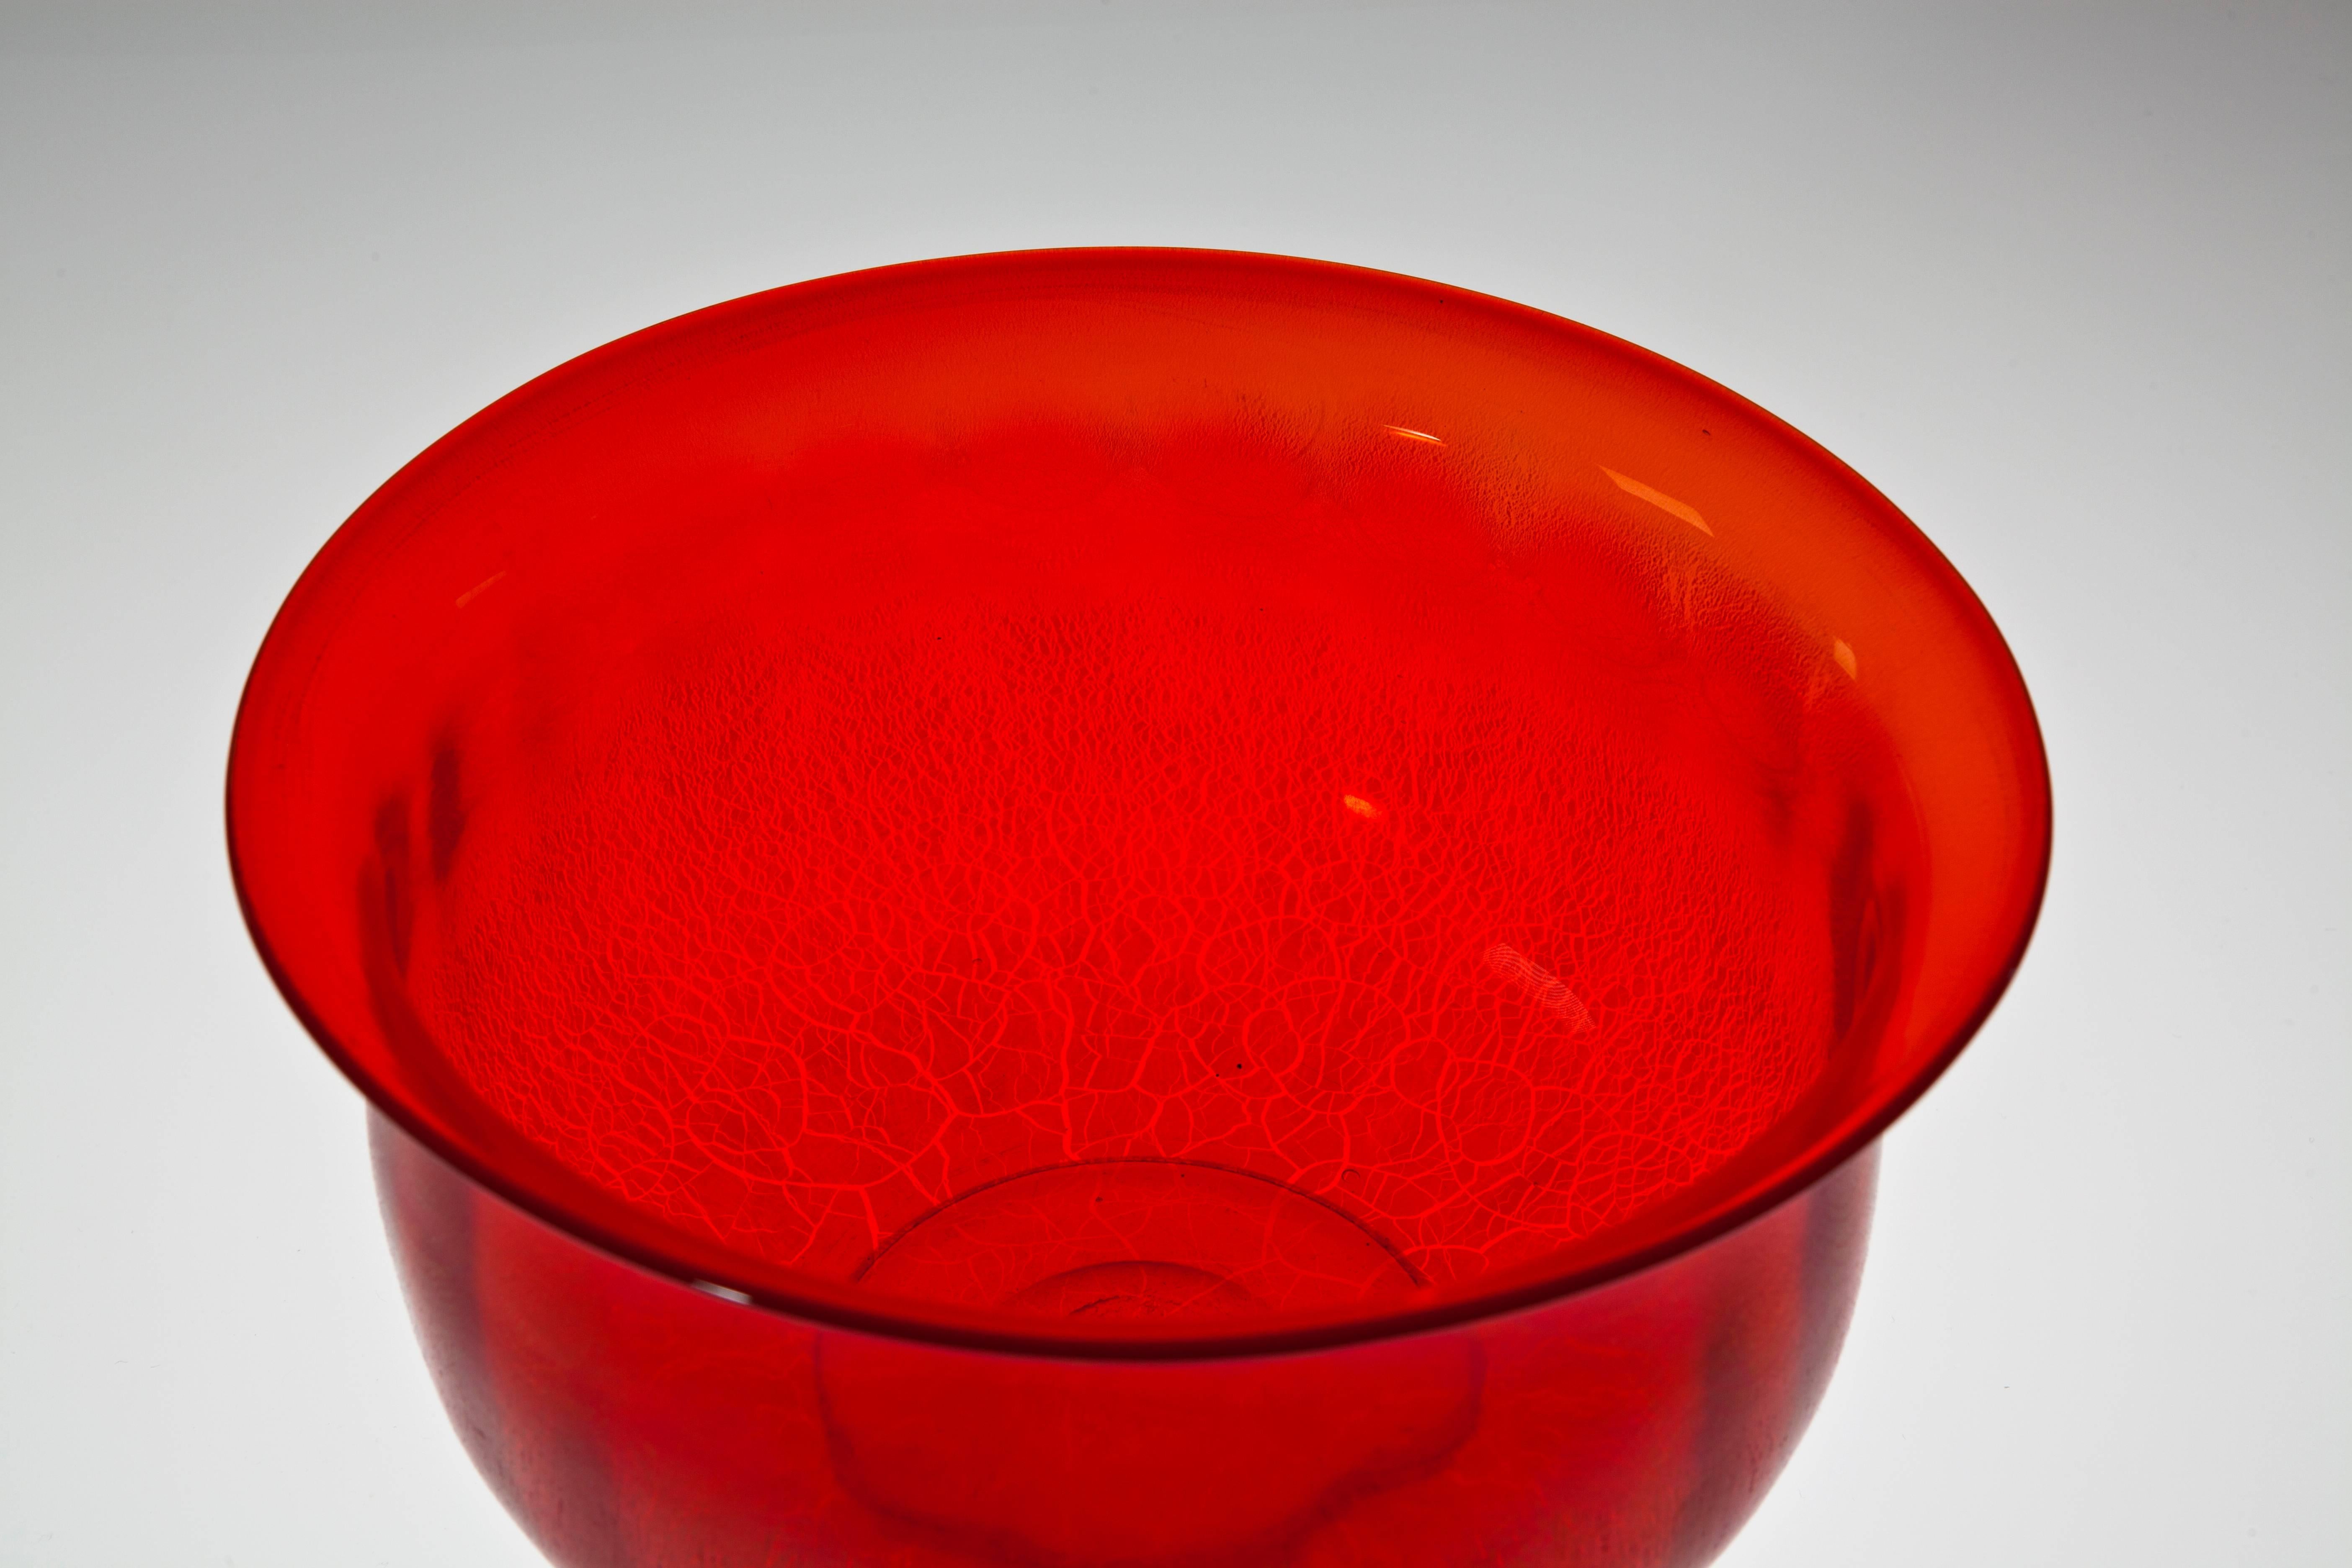 Beautiful red bowl with tin craquelé, designed by Andries Dirk Copier for glass factory of Leerdam in 1928. Signed 'AD Copier Leerdam Unica C659'.

Andries Dirk Copier (1901-1991) was an outstanding and very versatile Dutch artist in the twentieth